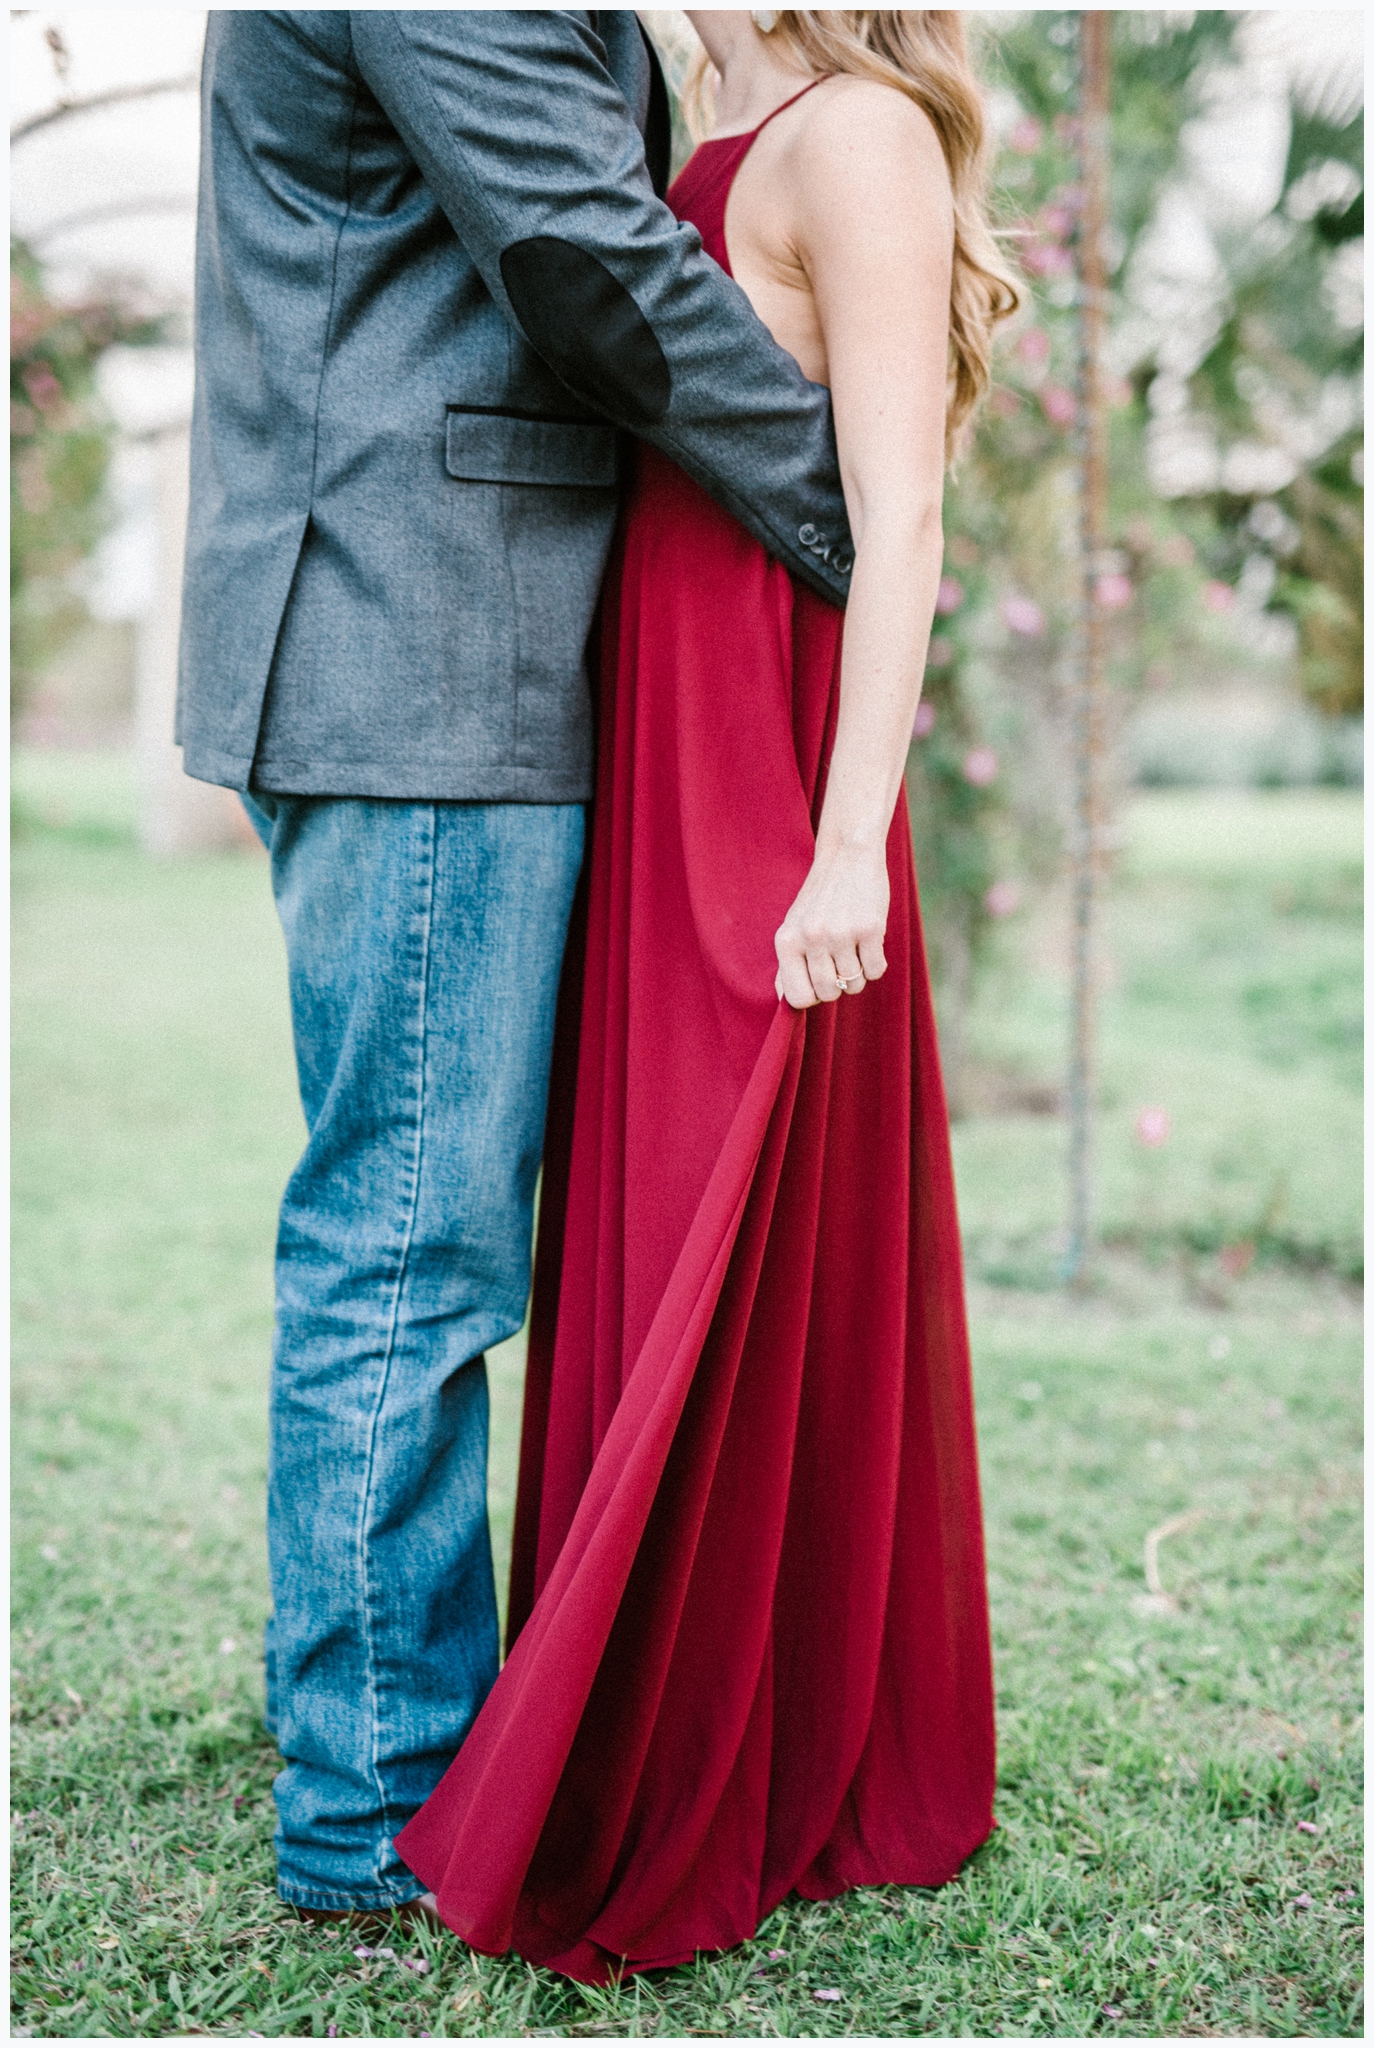 joslyn-holtfort-photography-engagement-session-le-san-michele-buda-texas_0017